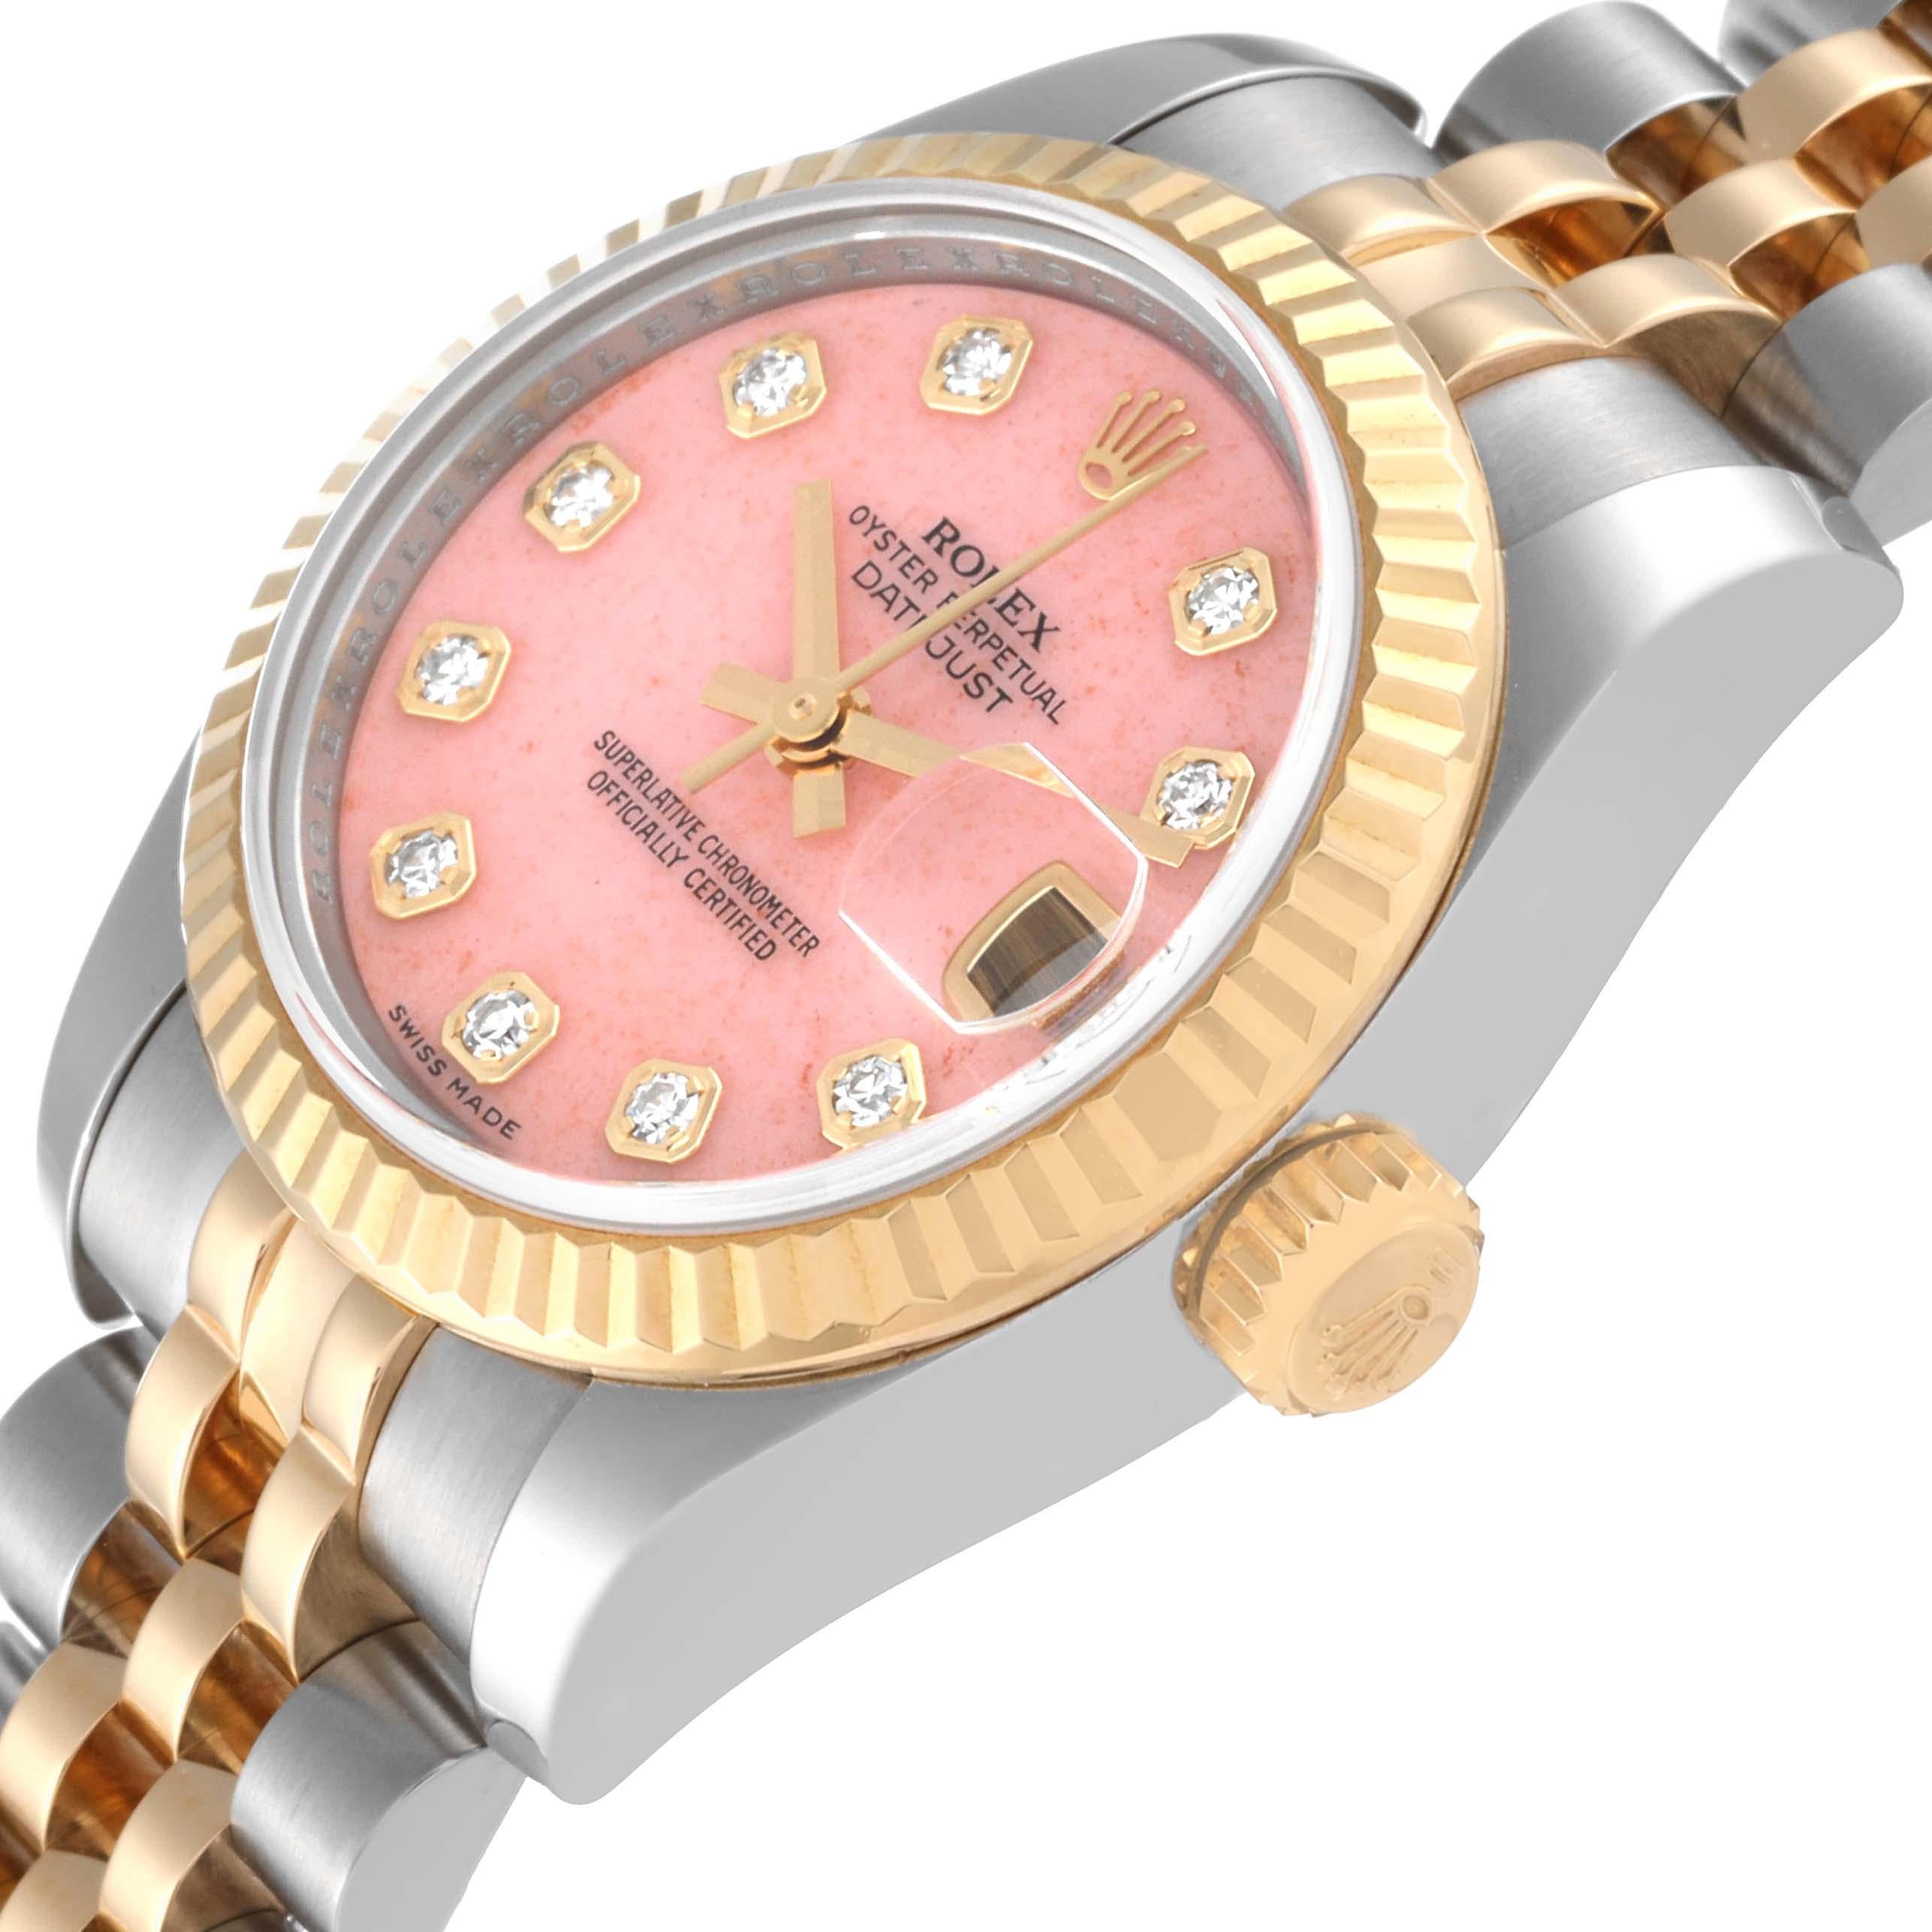 Rolex Datejust Steel Yellow Gold Coral Diamond Dial Ladies Watch 179173 For Sale 1